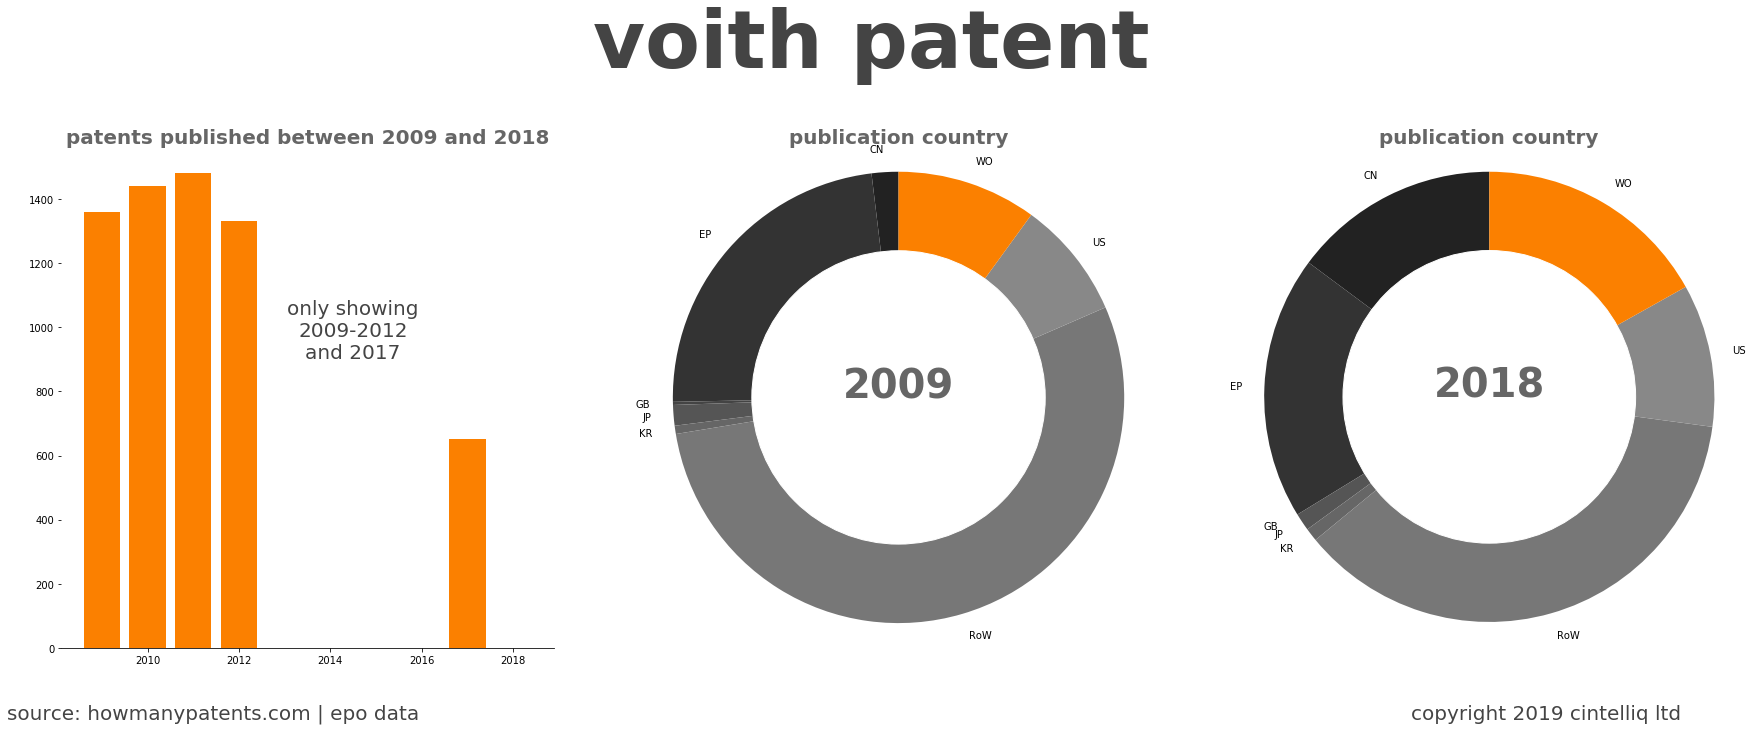 summary of patents for Voith Patent